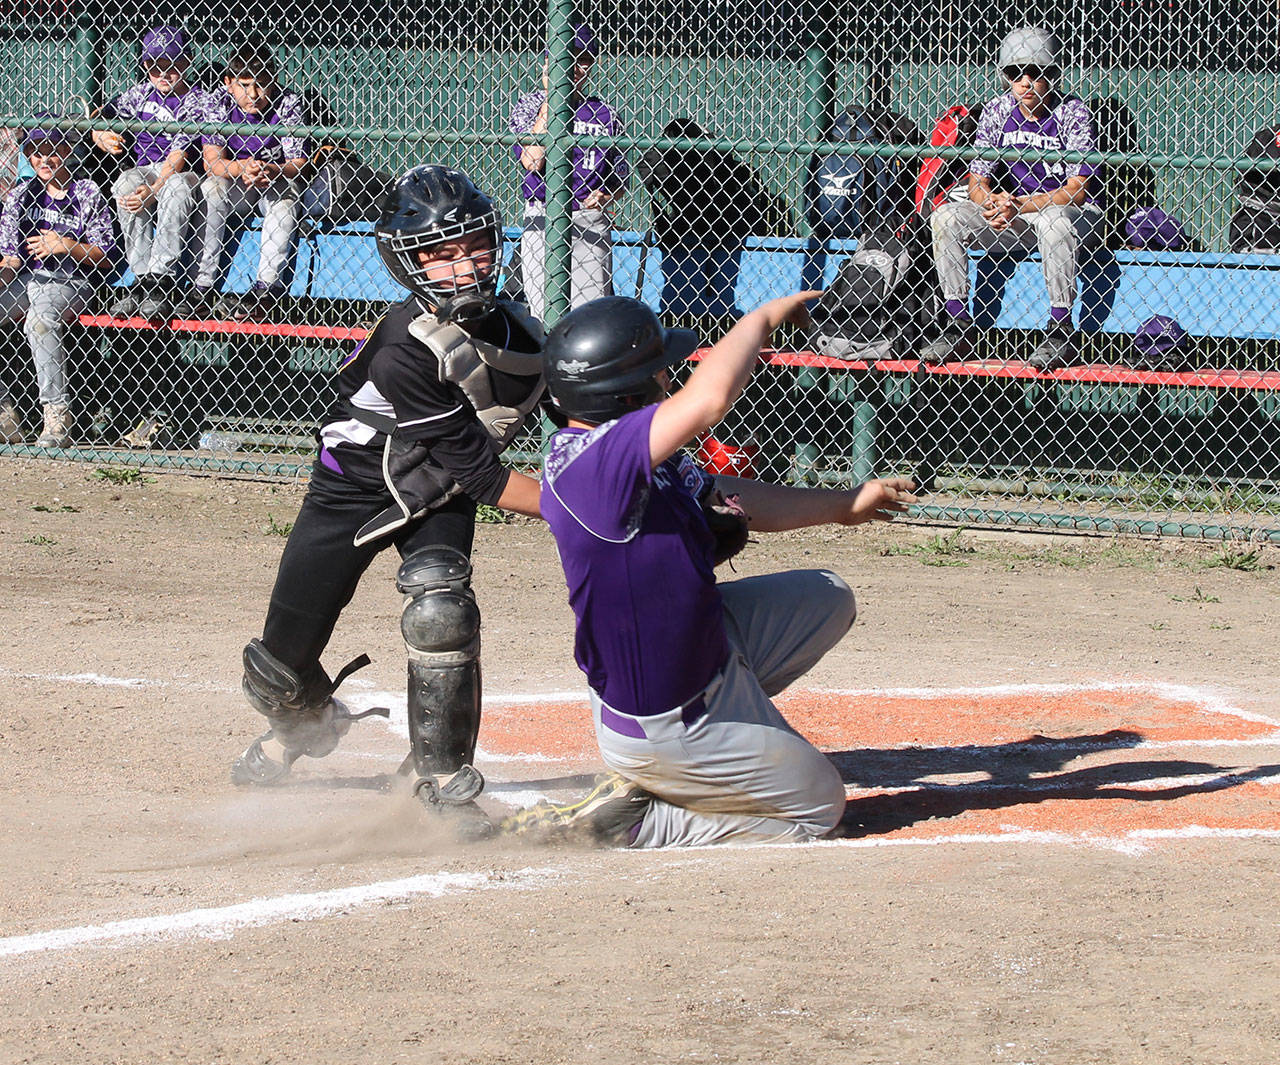 Catcher Kody Morrow slaps a tag on Anacortes’ Zack Decker trying to score on an over throw.(Photo by Jim Waller/Whidbey News-Times)